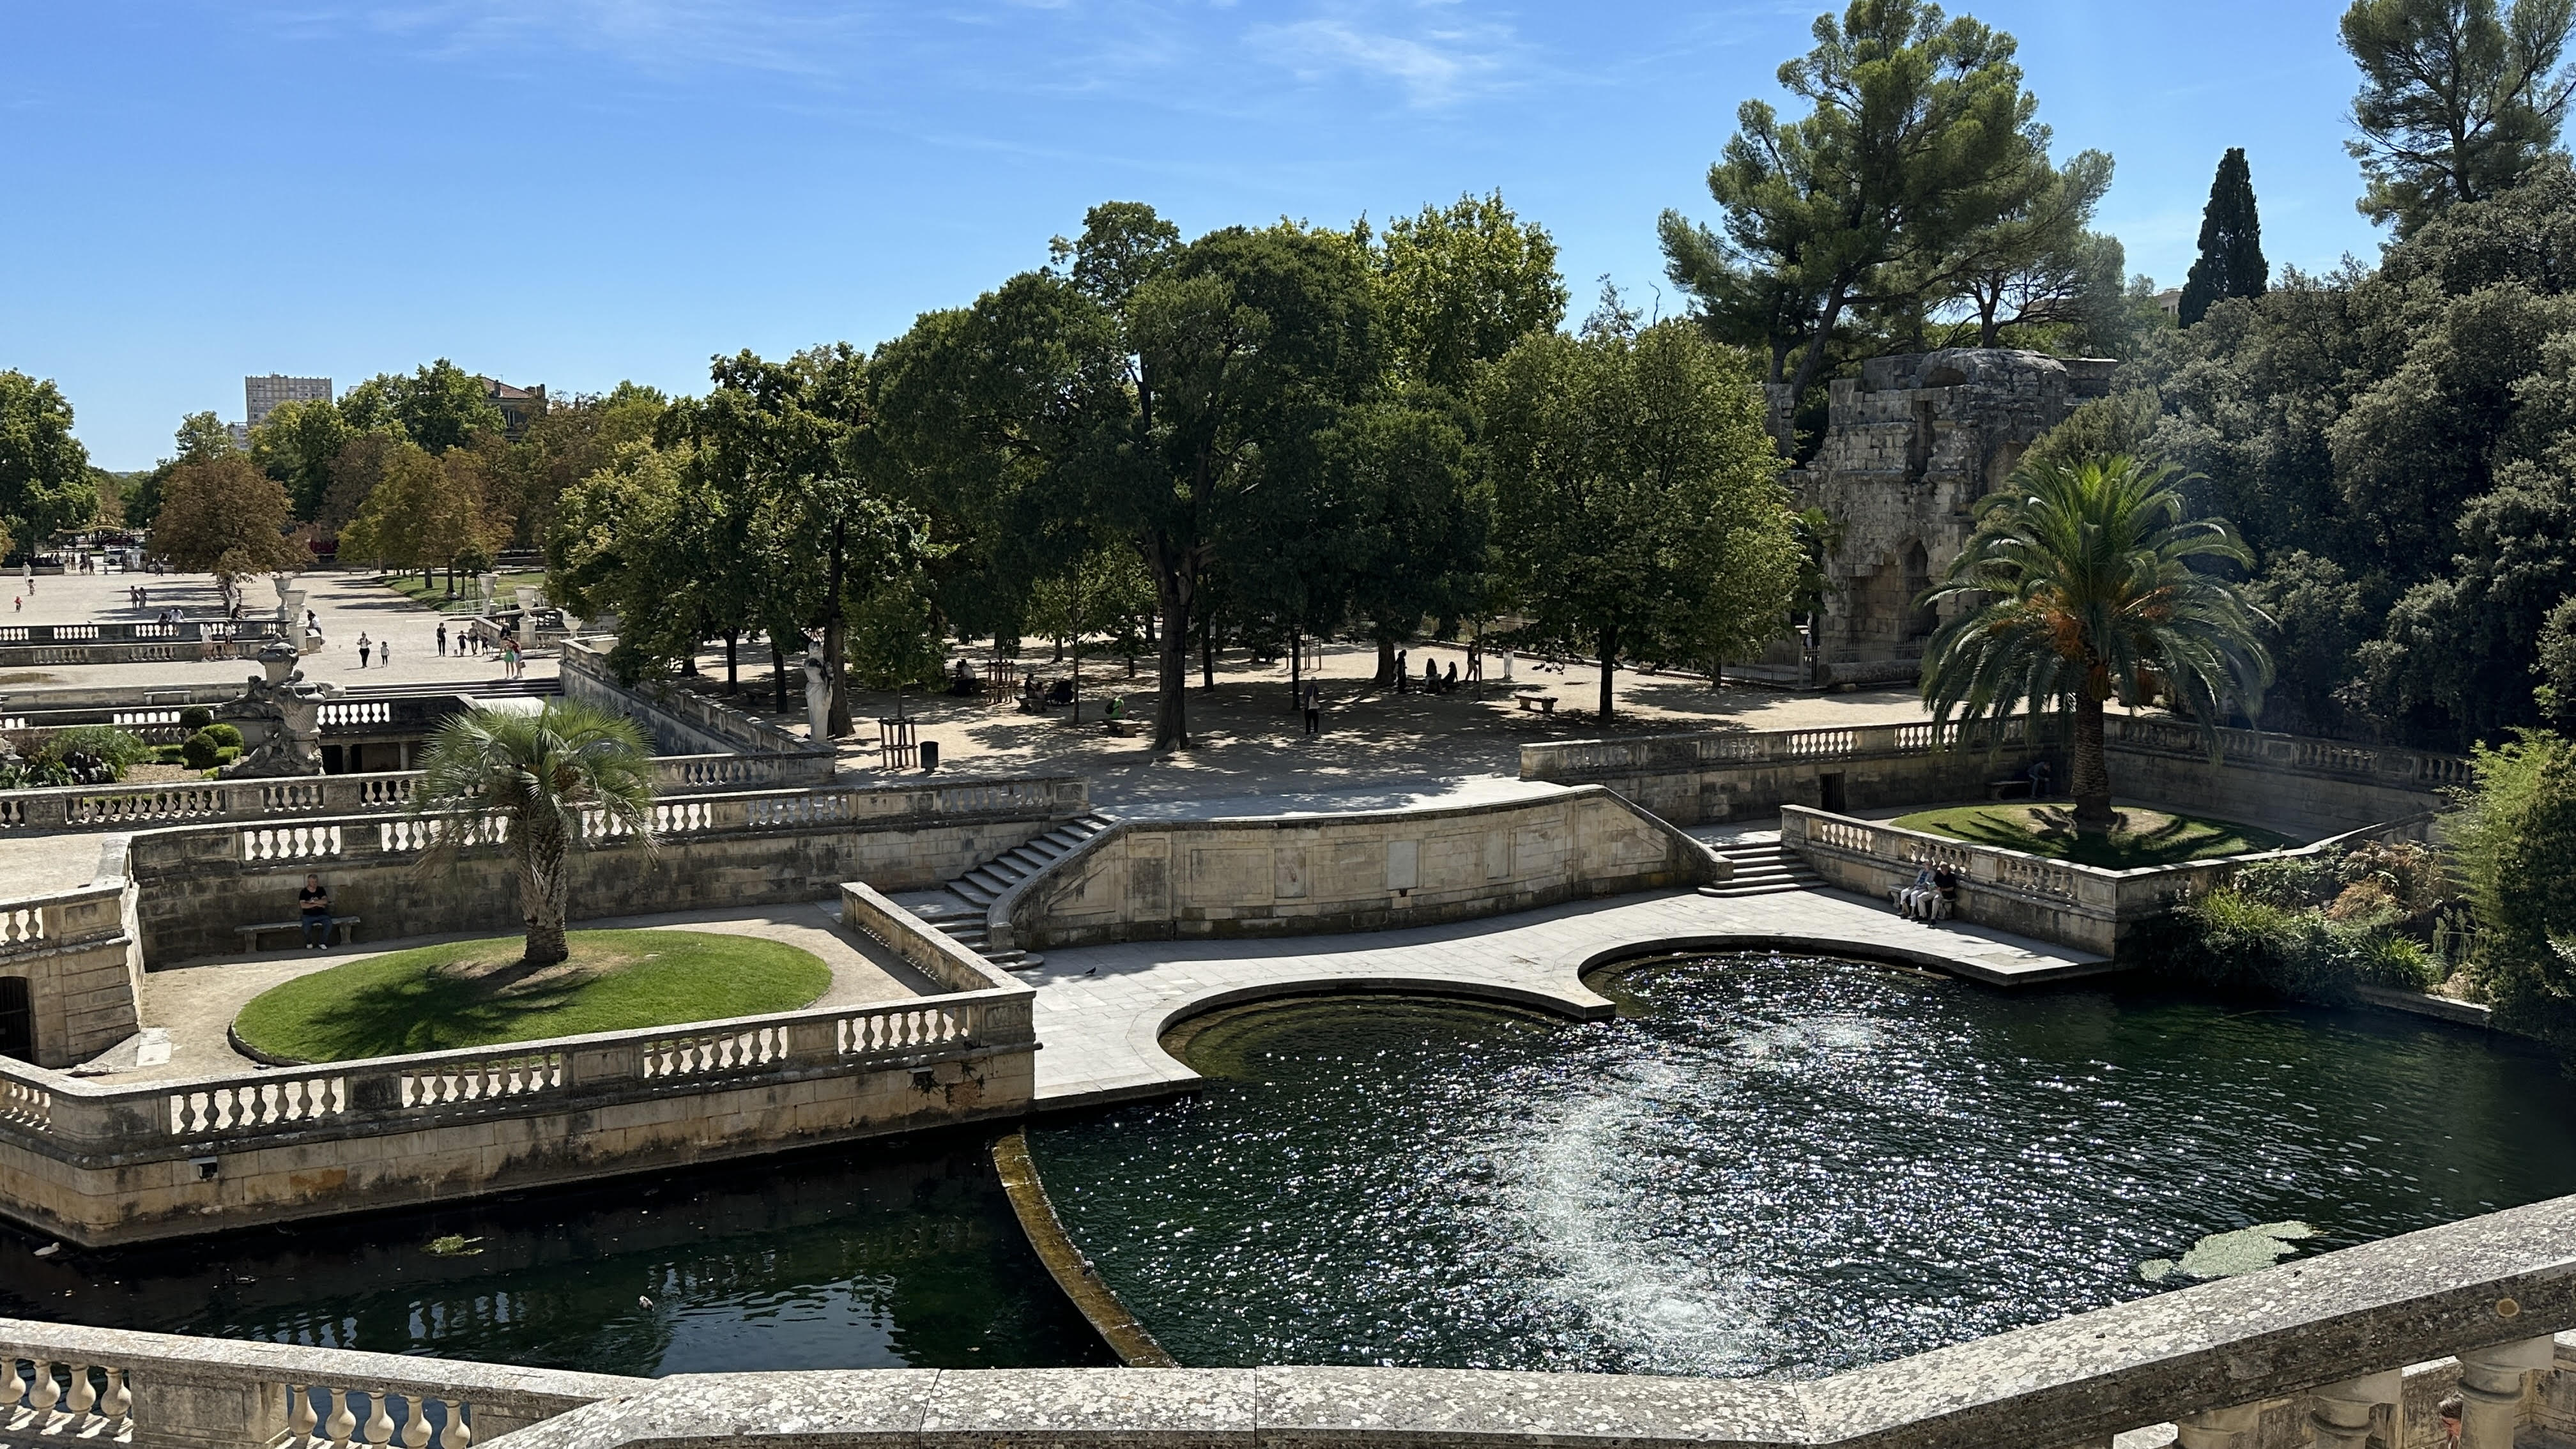 Scenic view of the Jardins de la Fontaine in Nîmes, France, featuring terraced gardens with classical stone balustrades, lush greenery, and a glistening pond, with visitors enjoying the sunny ambiance.